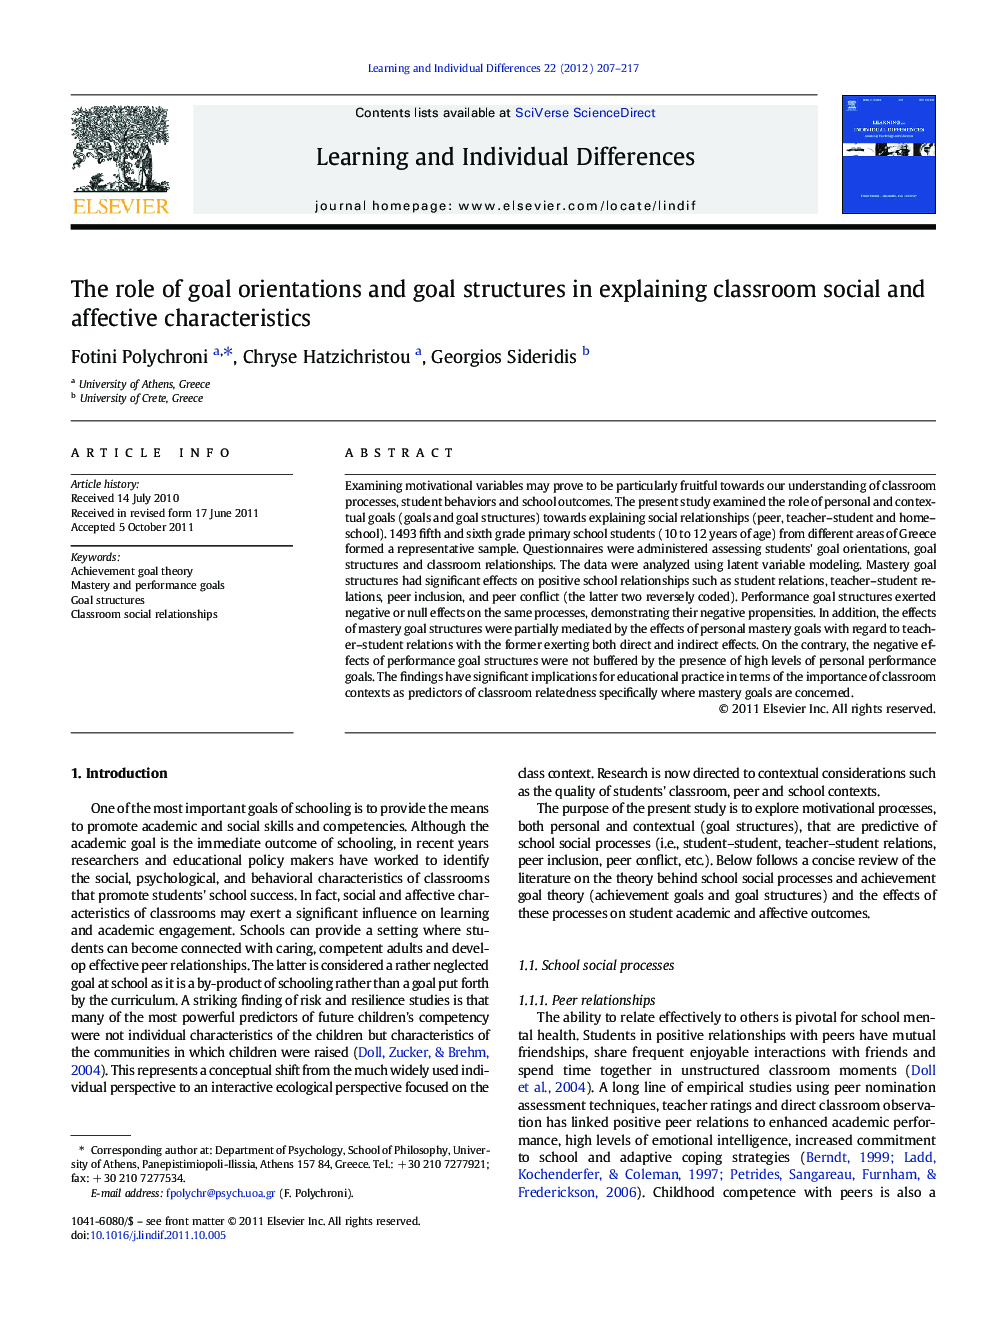 The role of goal orientations and goal structures in explaining classroom social and affective characteristics